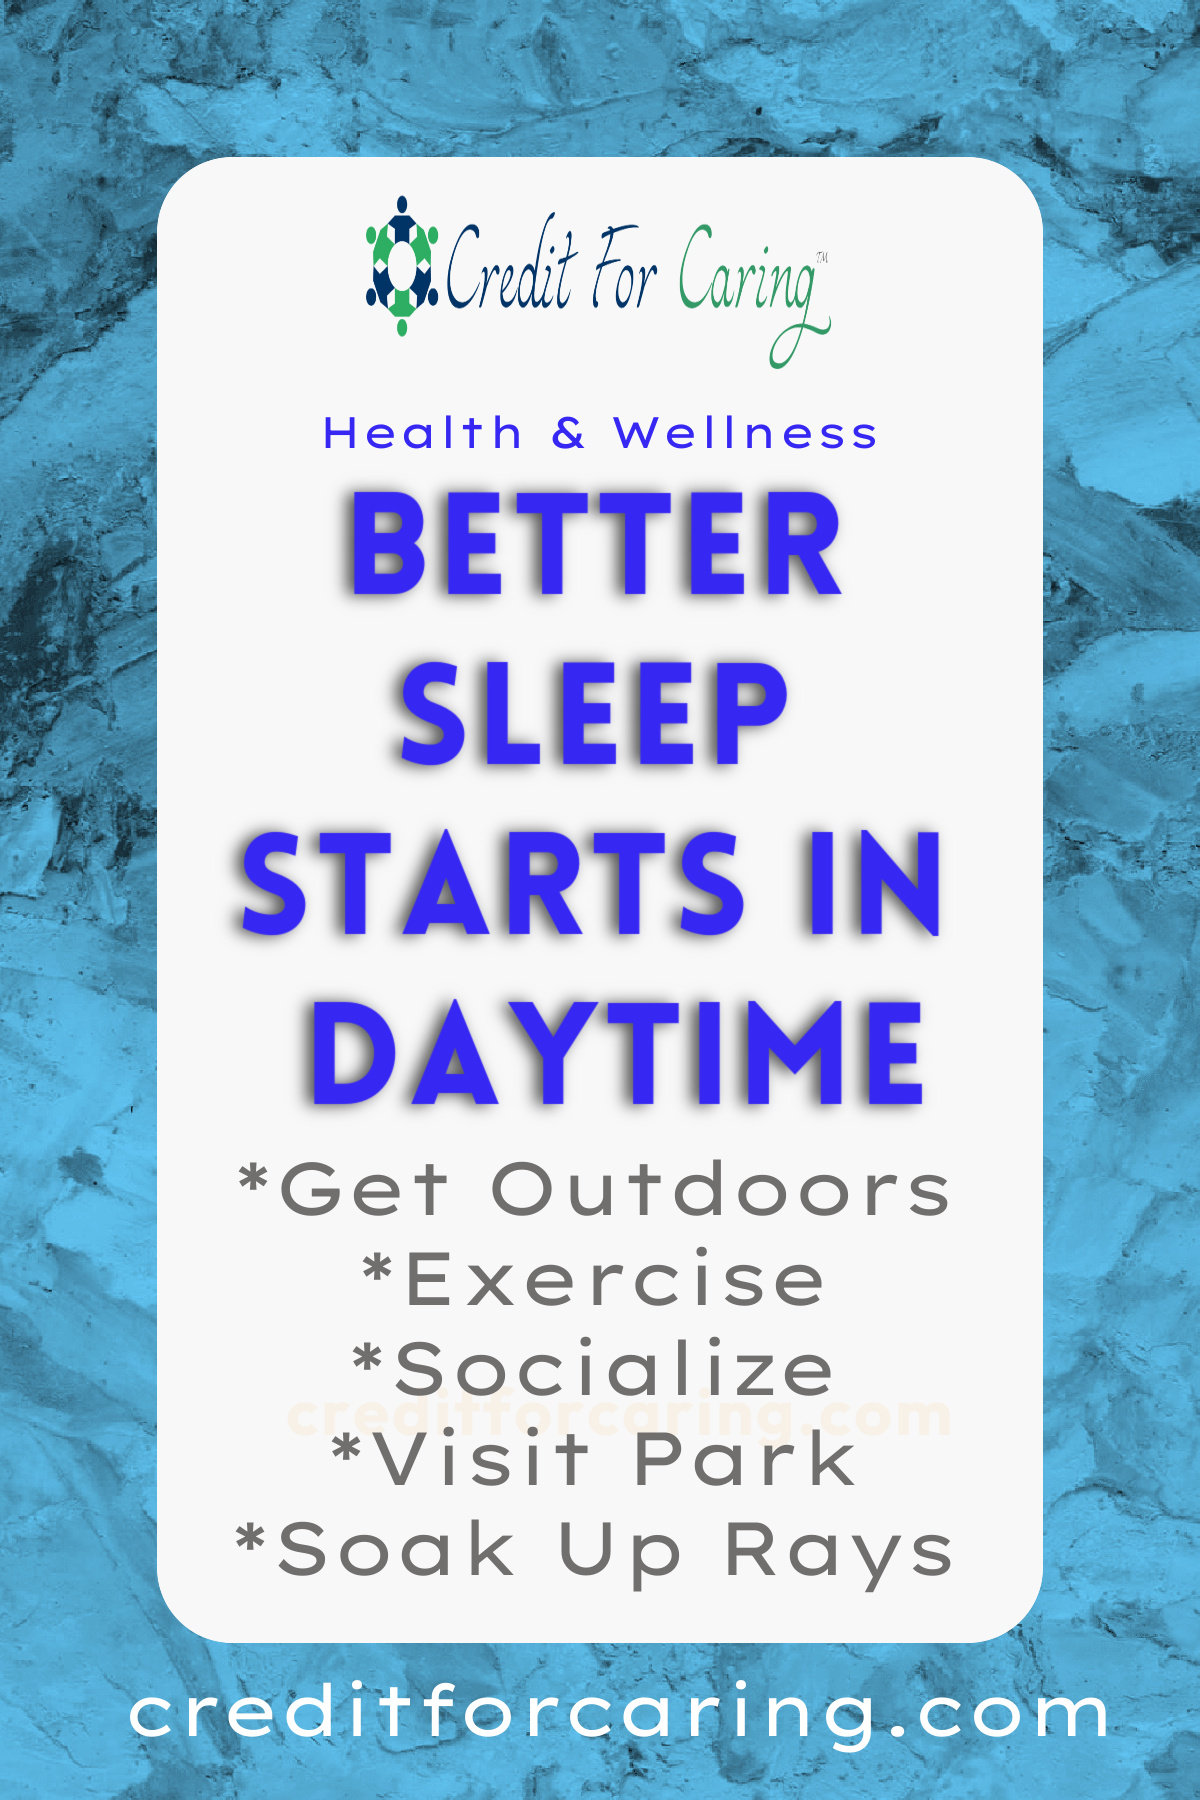 ? Improve the quality and duration of your nighttime rest by making simple changes to your daytime routine.